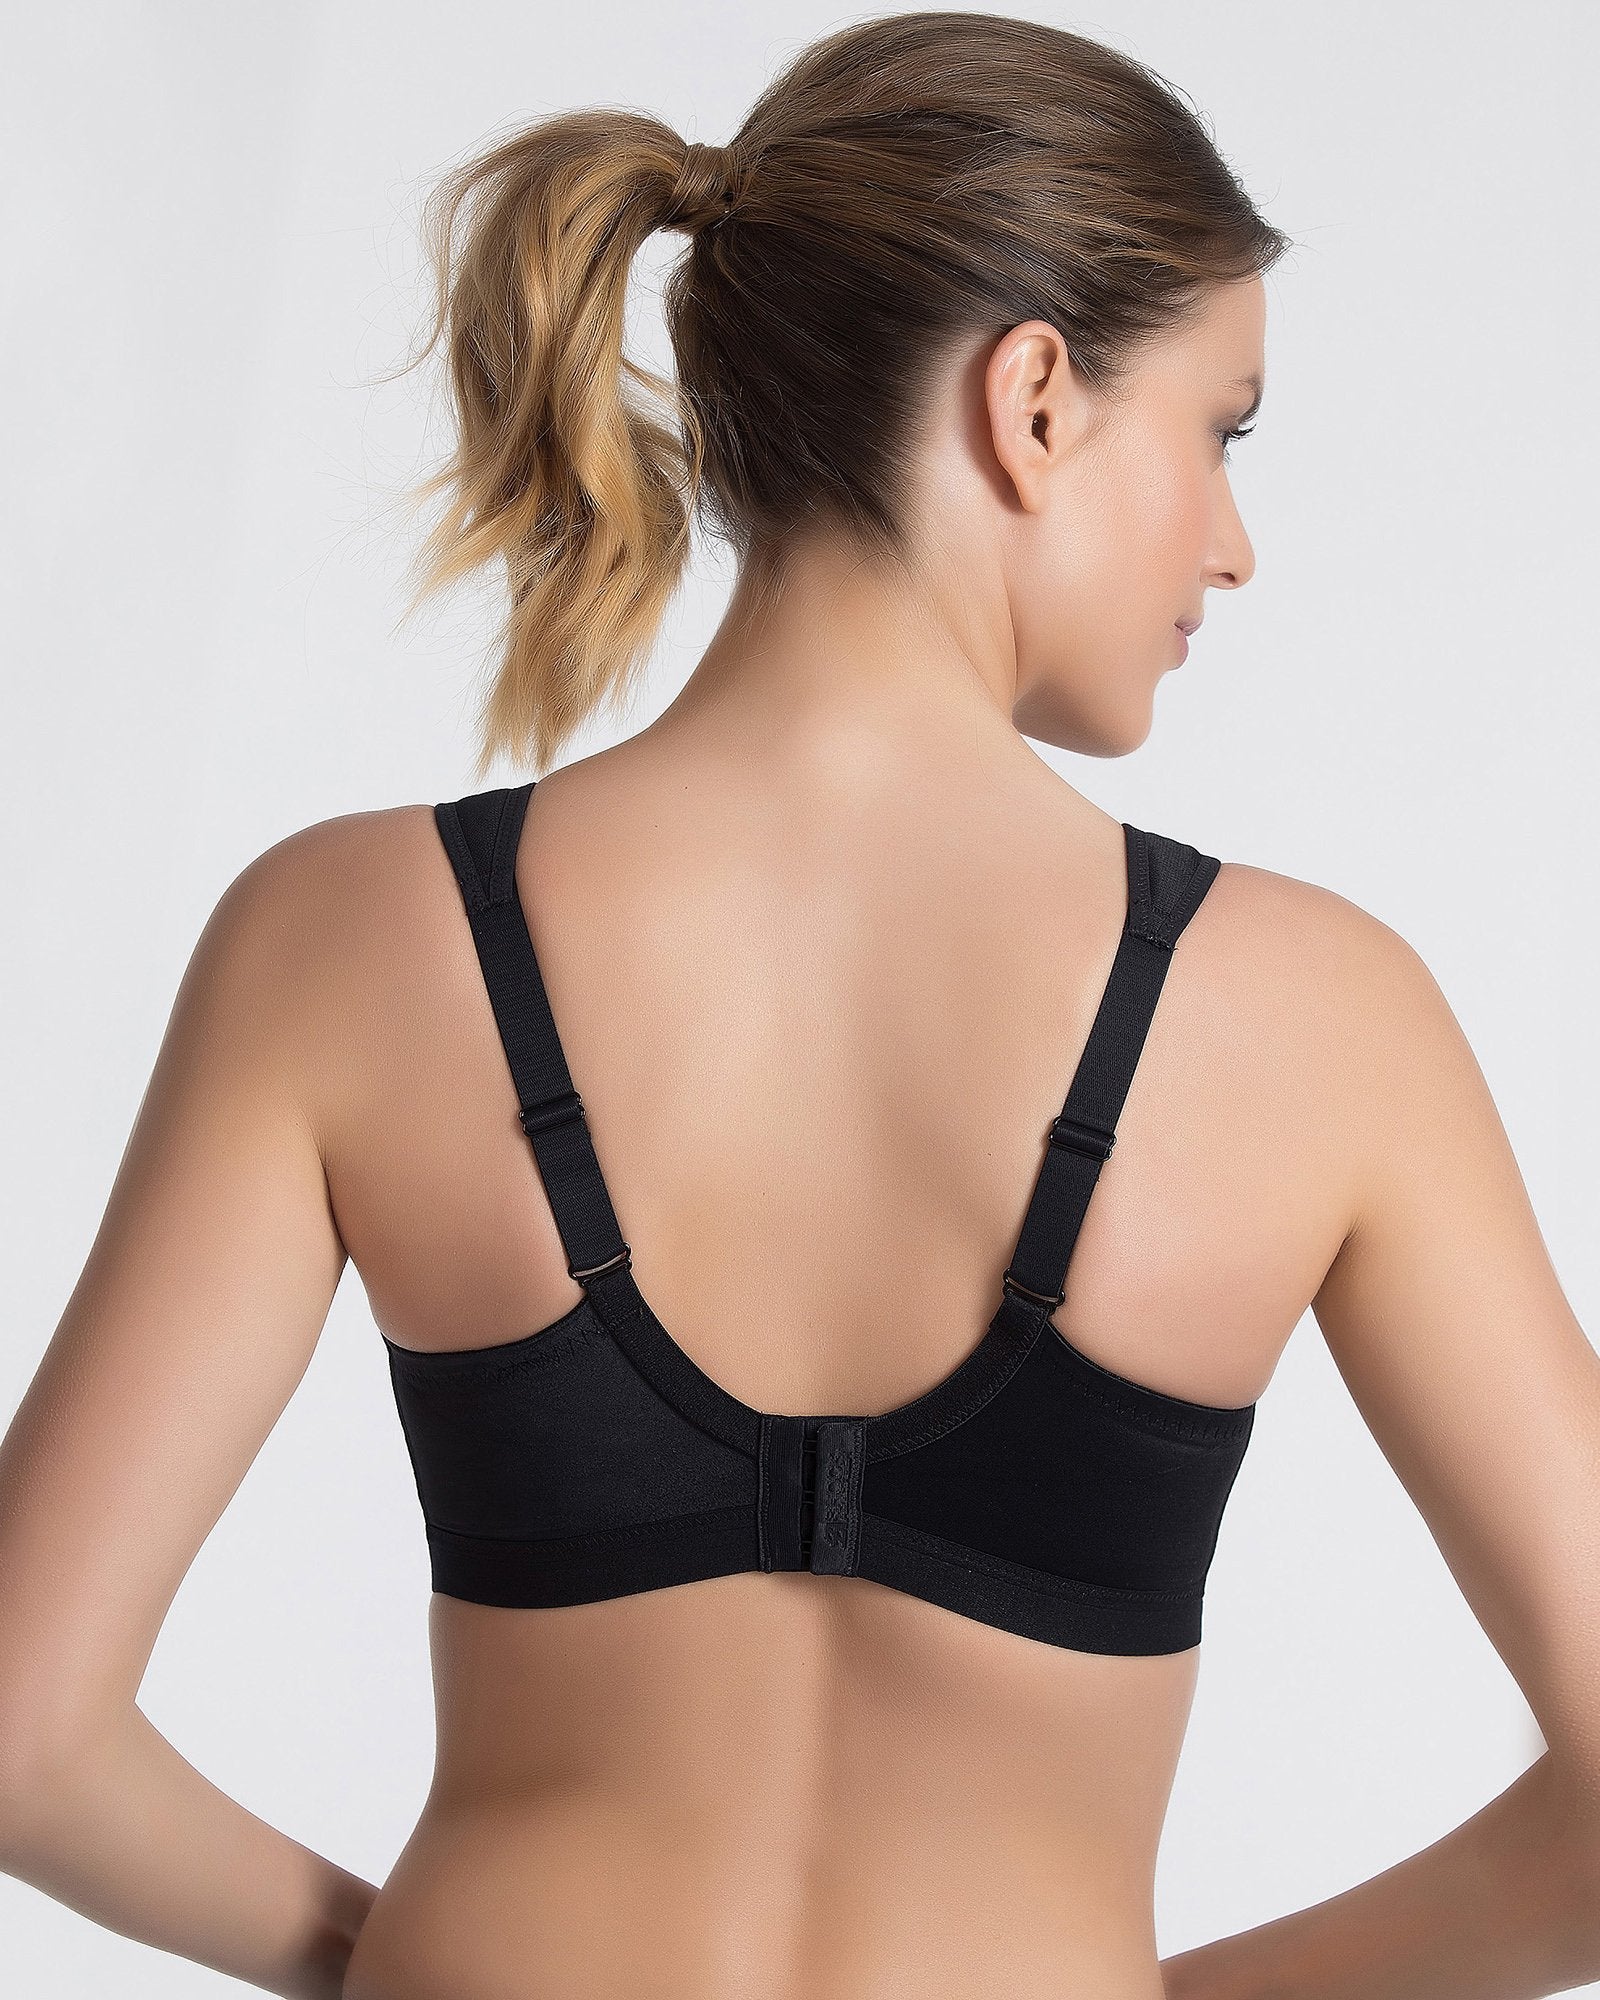 Shock Absorber D+ Classic Support - Sports Wirefree Bra  Available at Illusions Lingerie